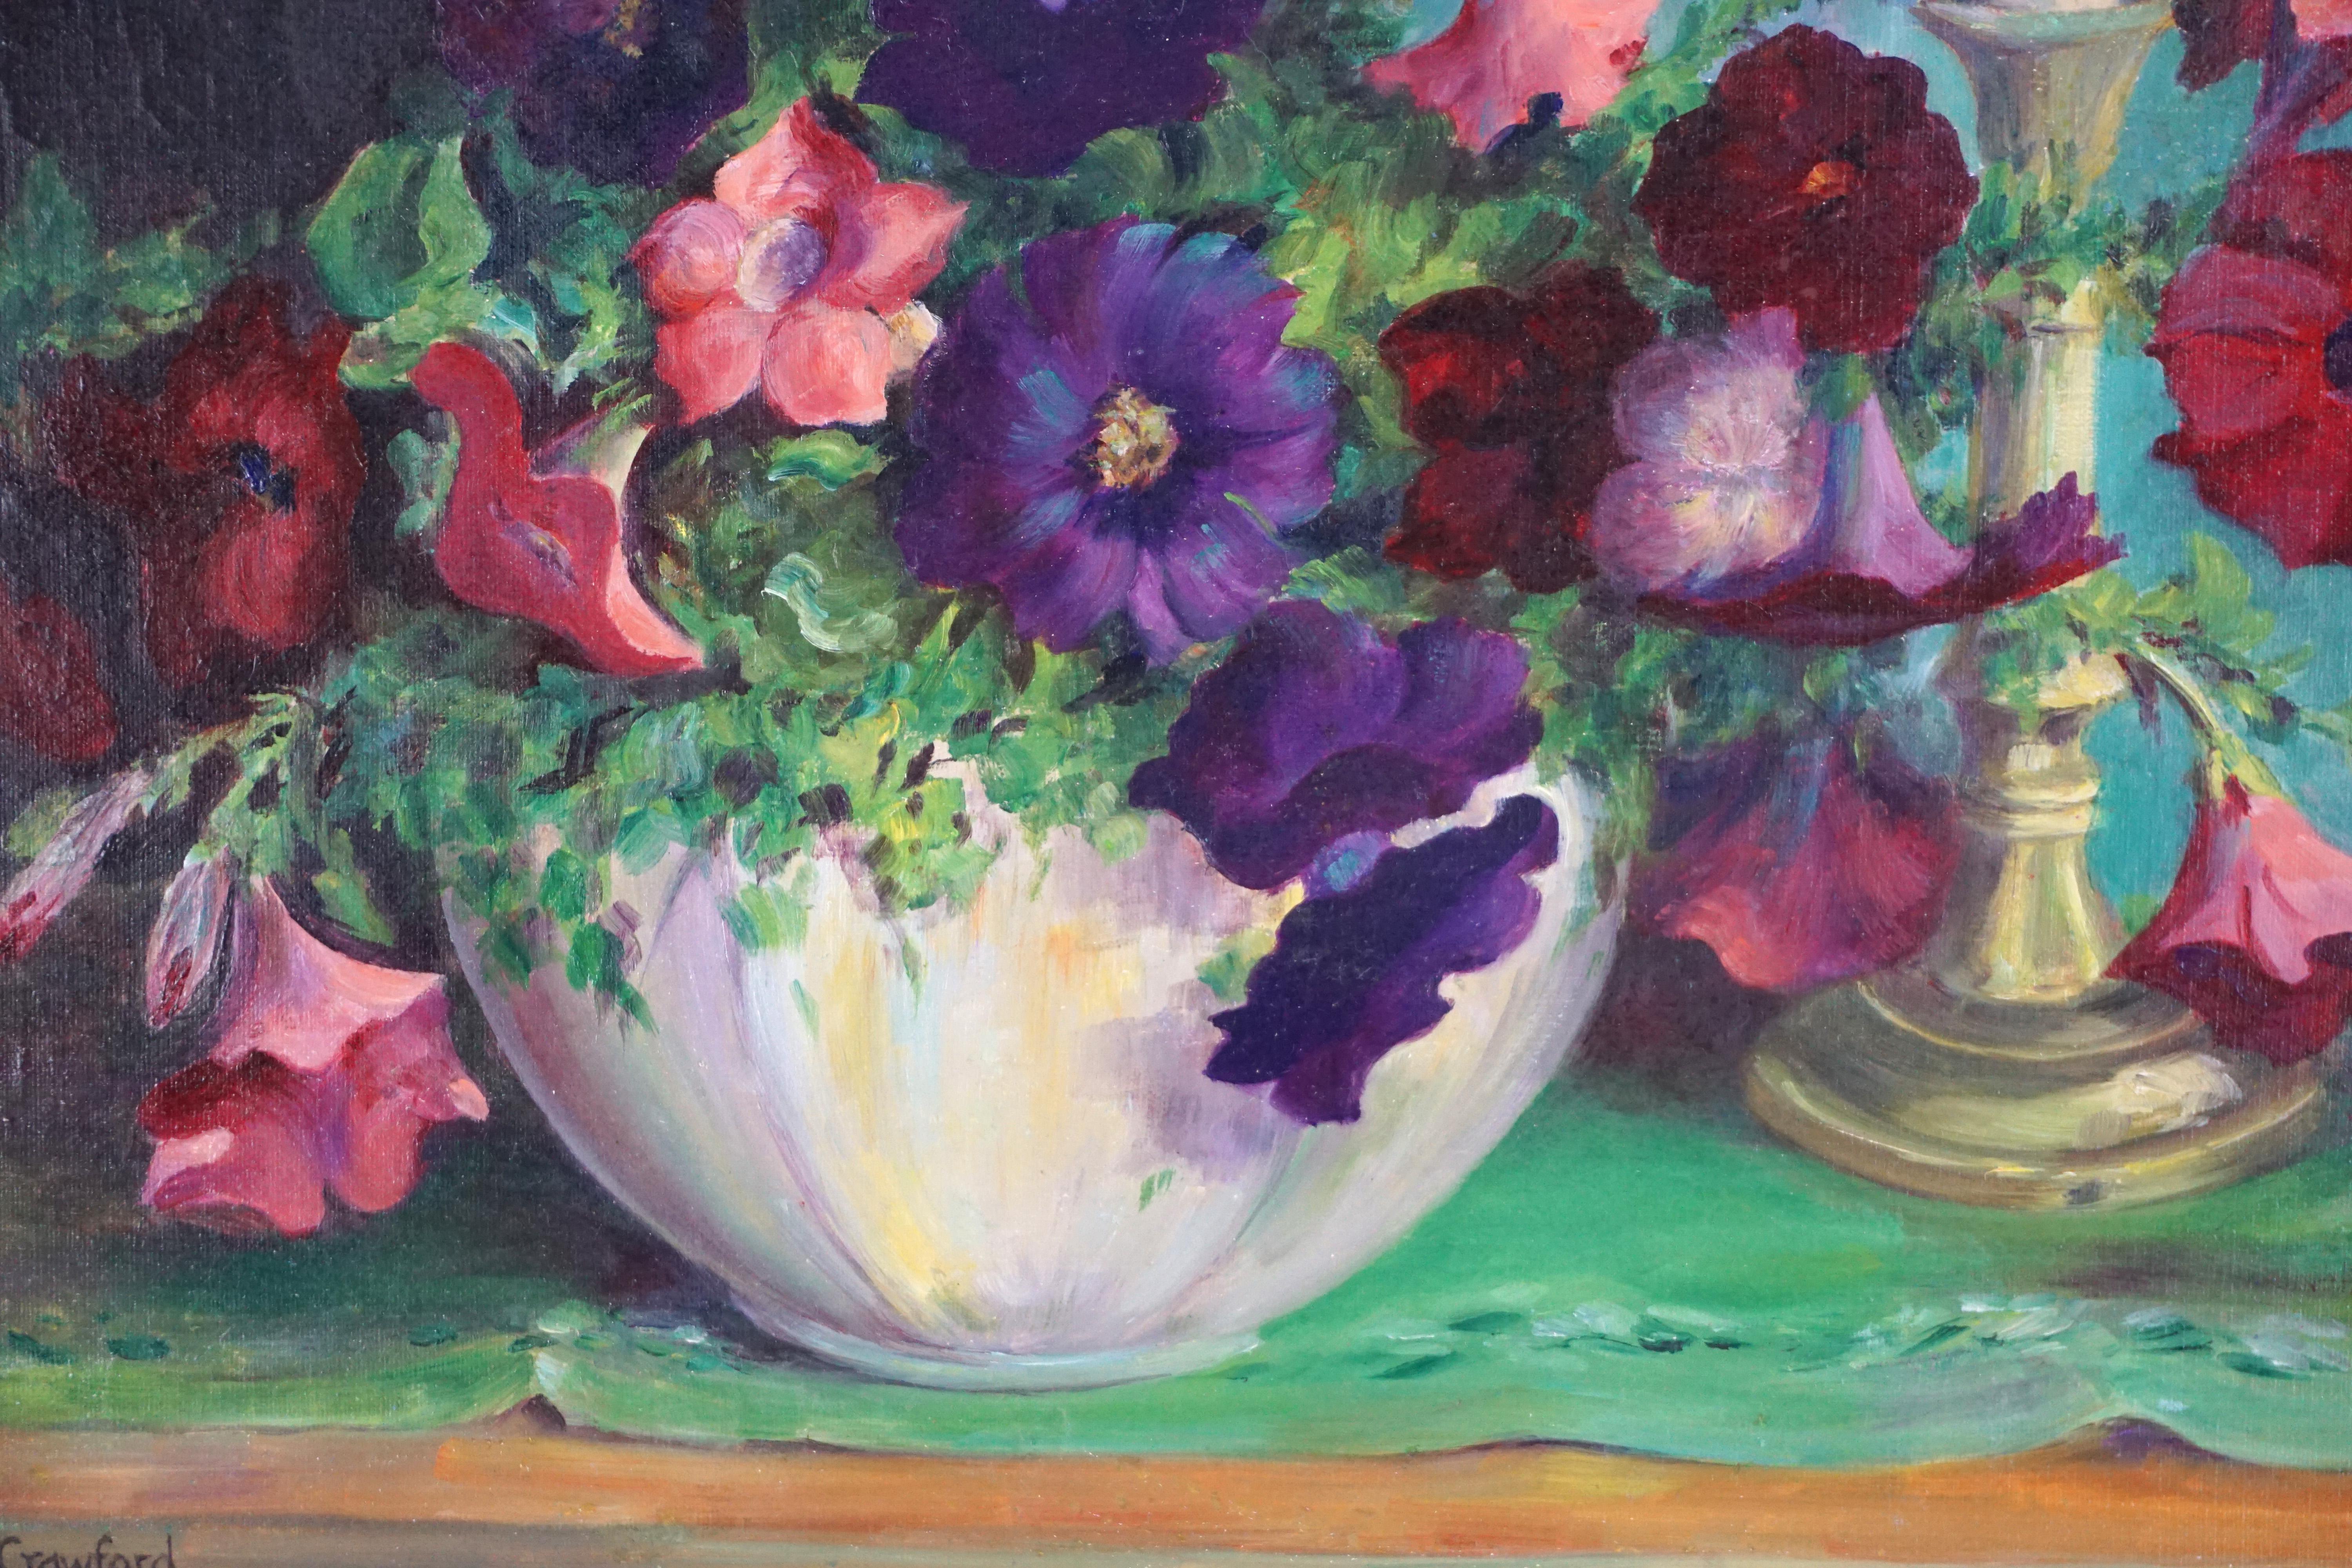 1930s Vibrant Floral Still Life with Petunias and Candle Stick - American Impressionist Painting by Jennie Thatcher Crawford